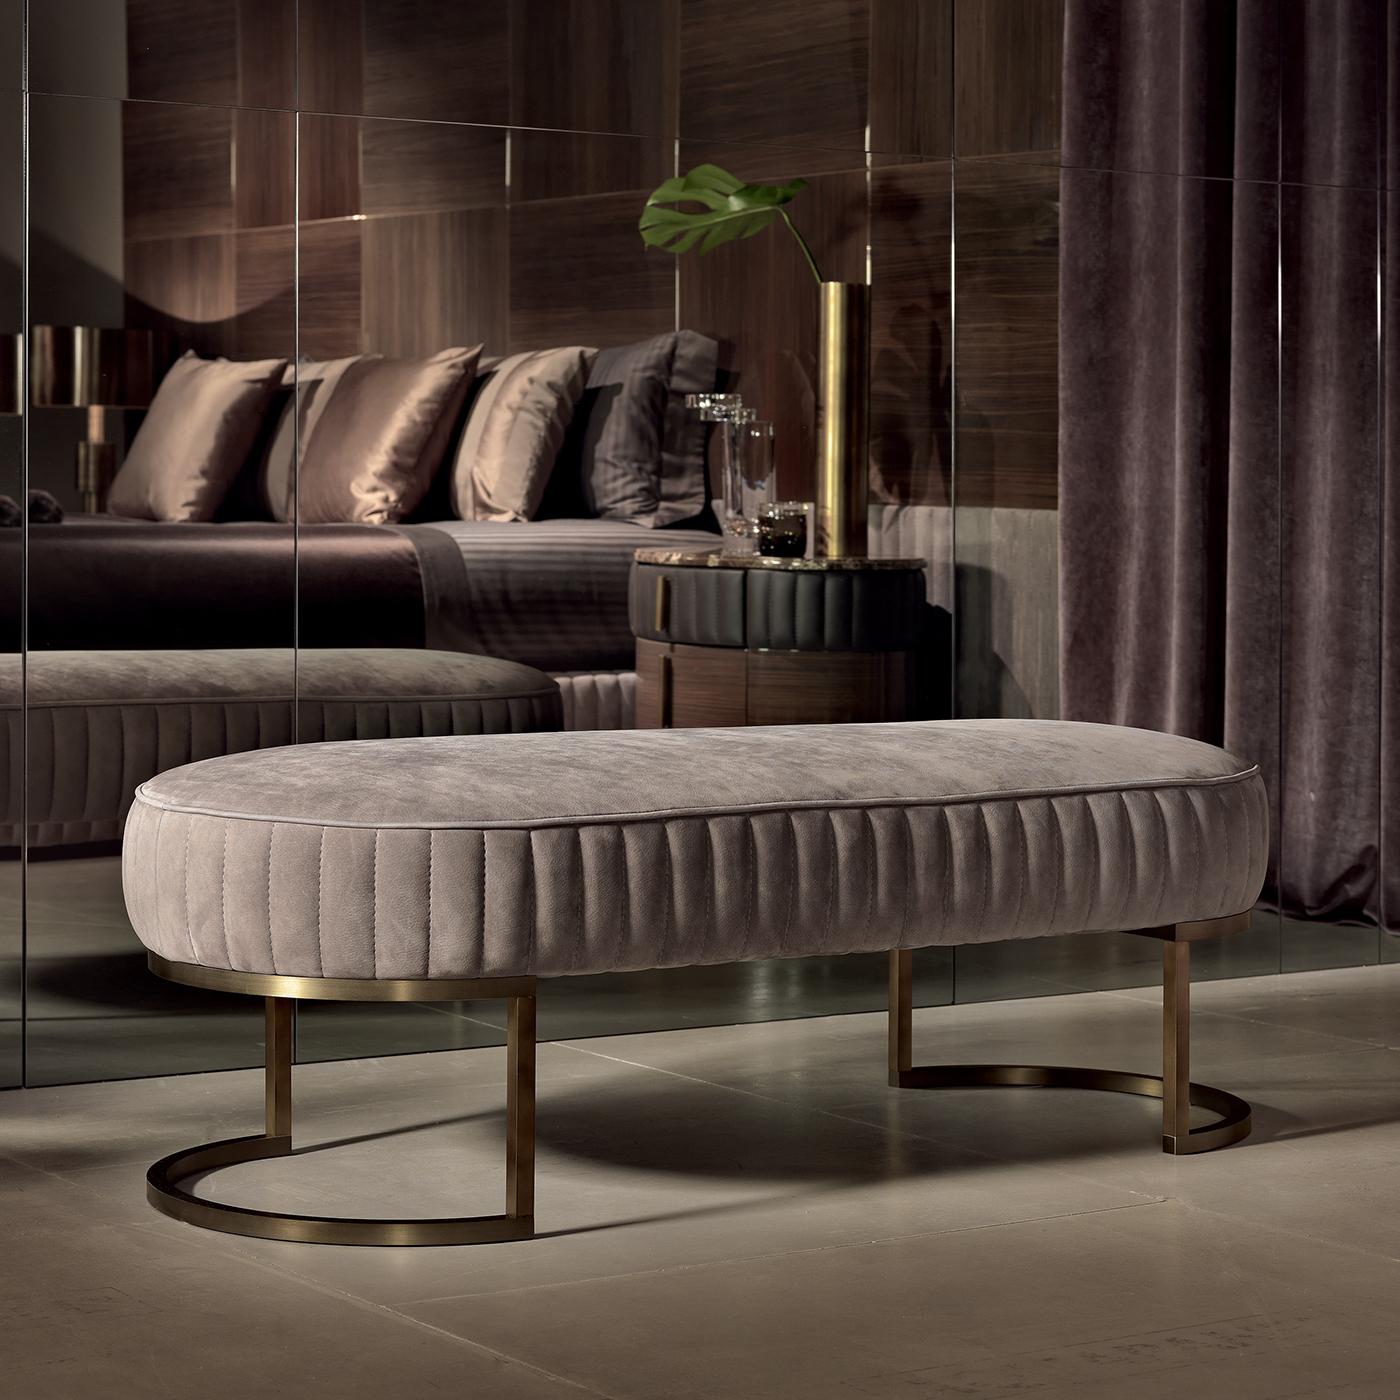 Merging midcentury austerity with Hollywood glamour, the upholstered gray leather seat of this elongated bench (in the picture fabric nabouk leather in tortora 215 color) is balanced on delicately semicircular burnished brass legs. A welcoming seat